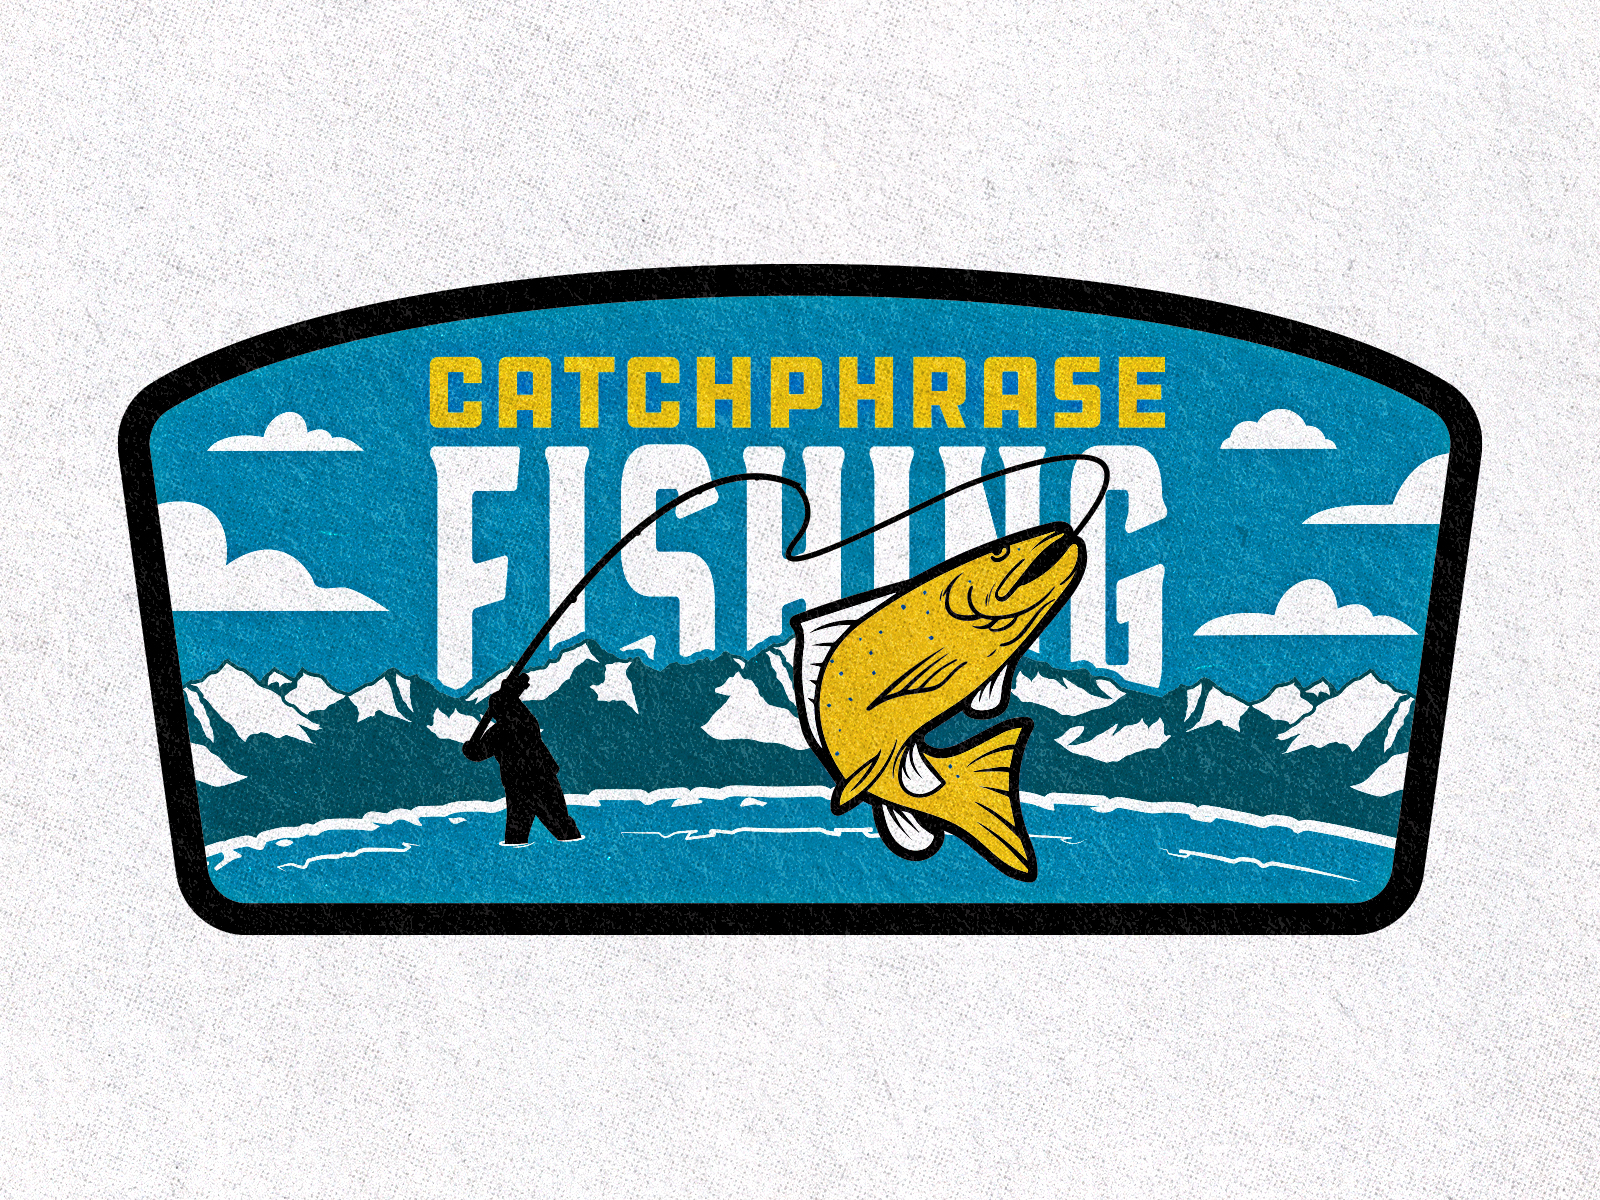 Catchphrase Fishing Patch by Cameron Kinchen on Dribbble